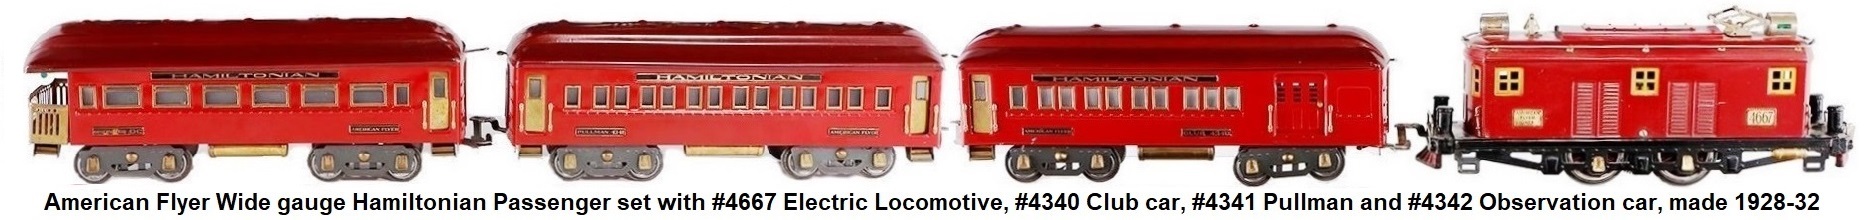 American Flyer Wide gauge #1484 Hamiltonian Passenger set with #4667 electric locomotive, #4340 club car, #4341 Pullman, and #4342 observation car made 1928-32